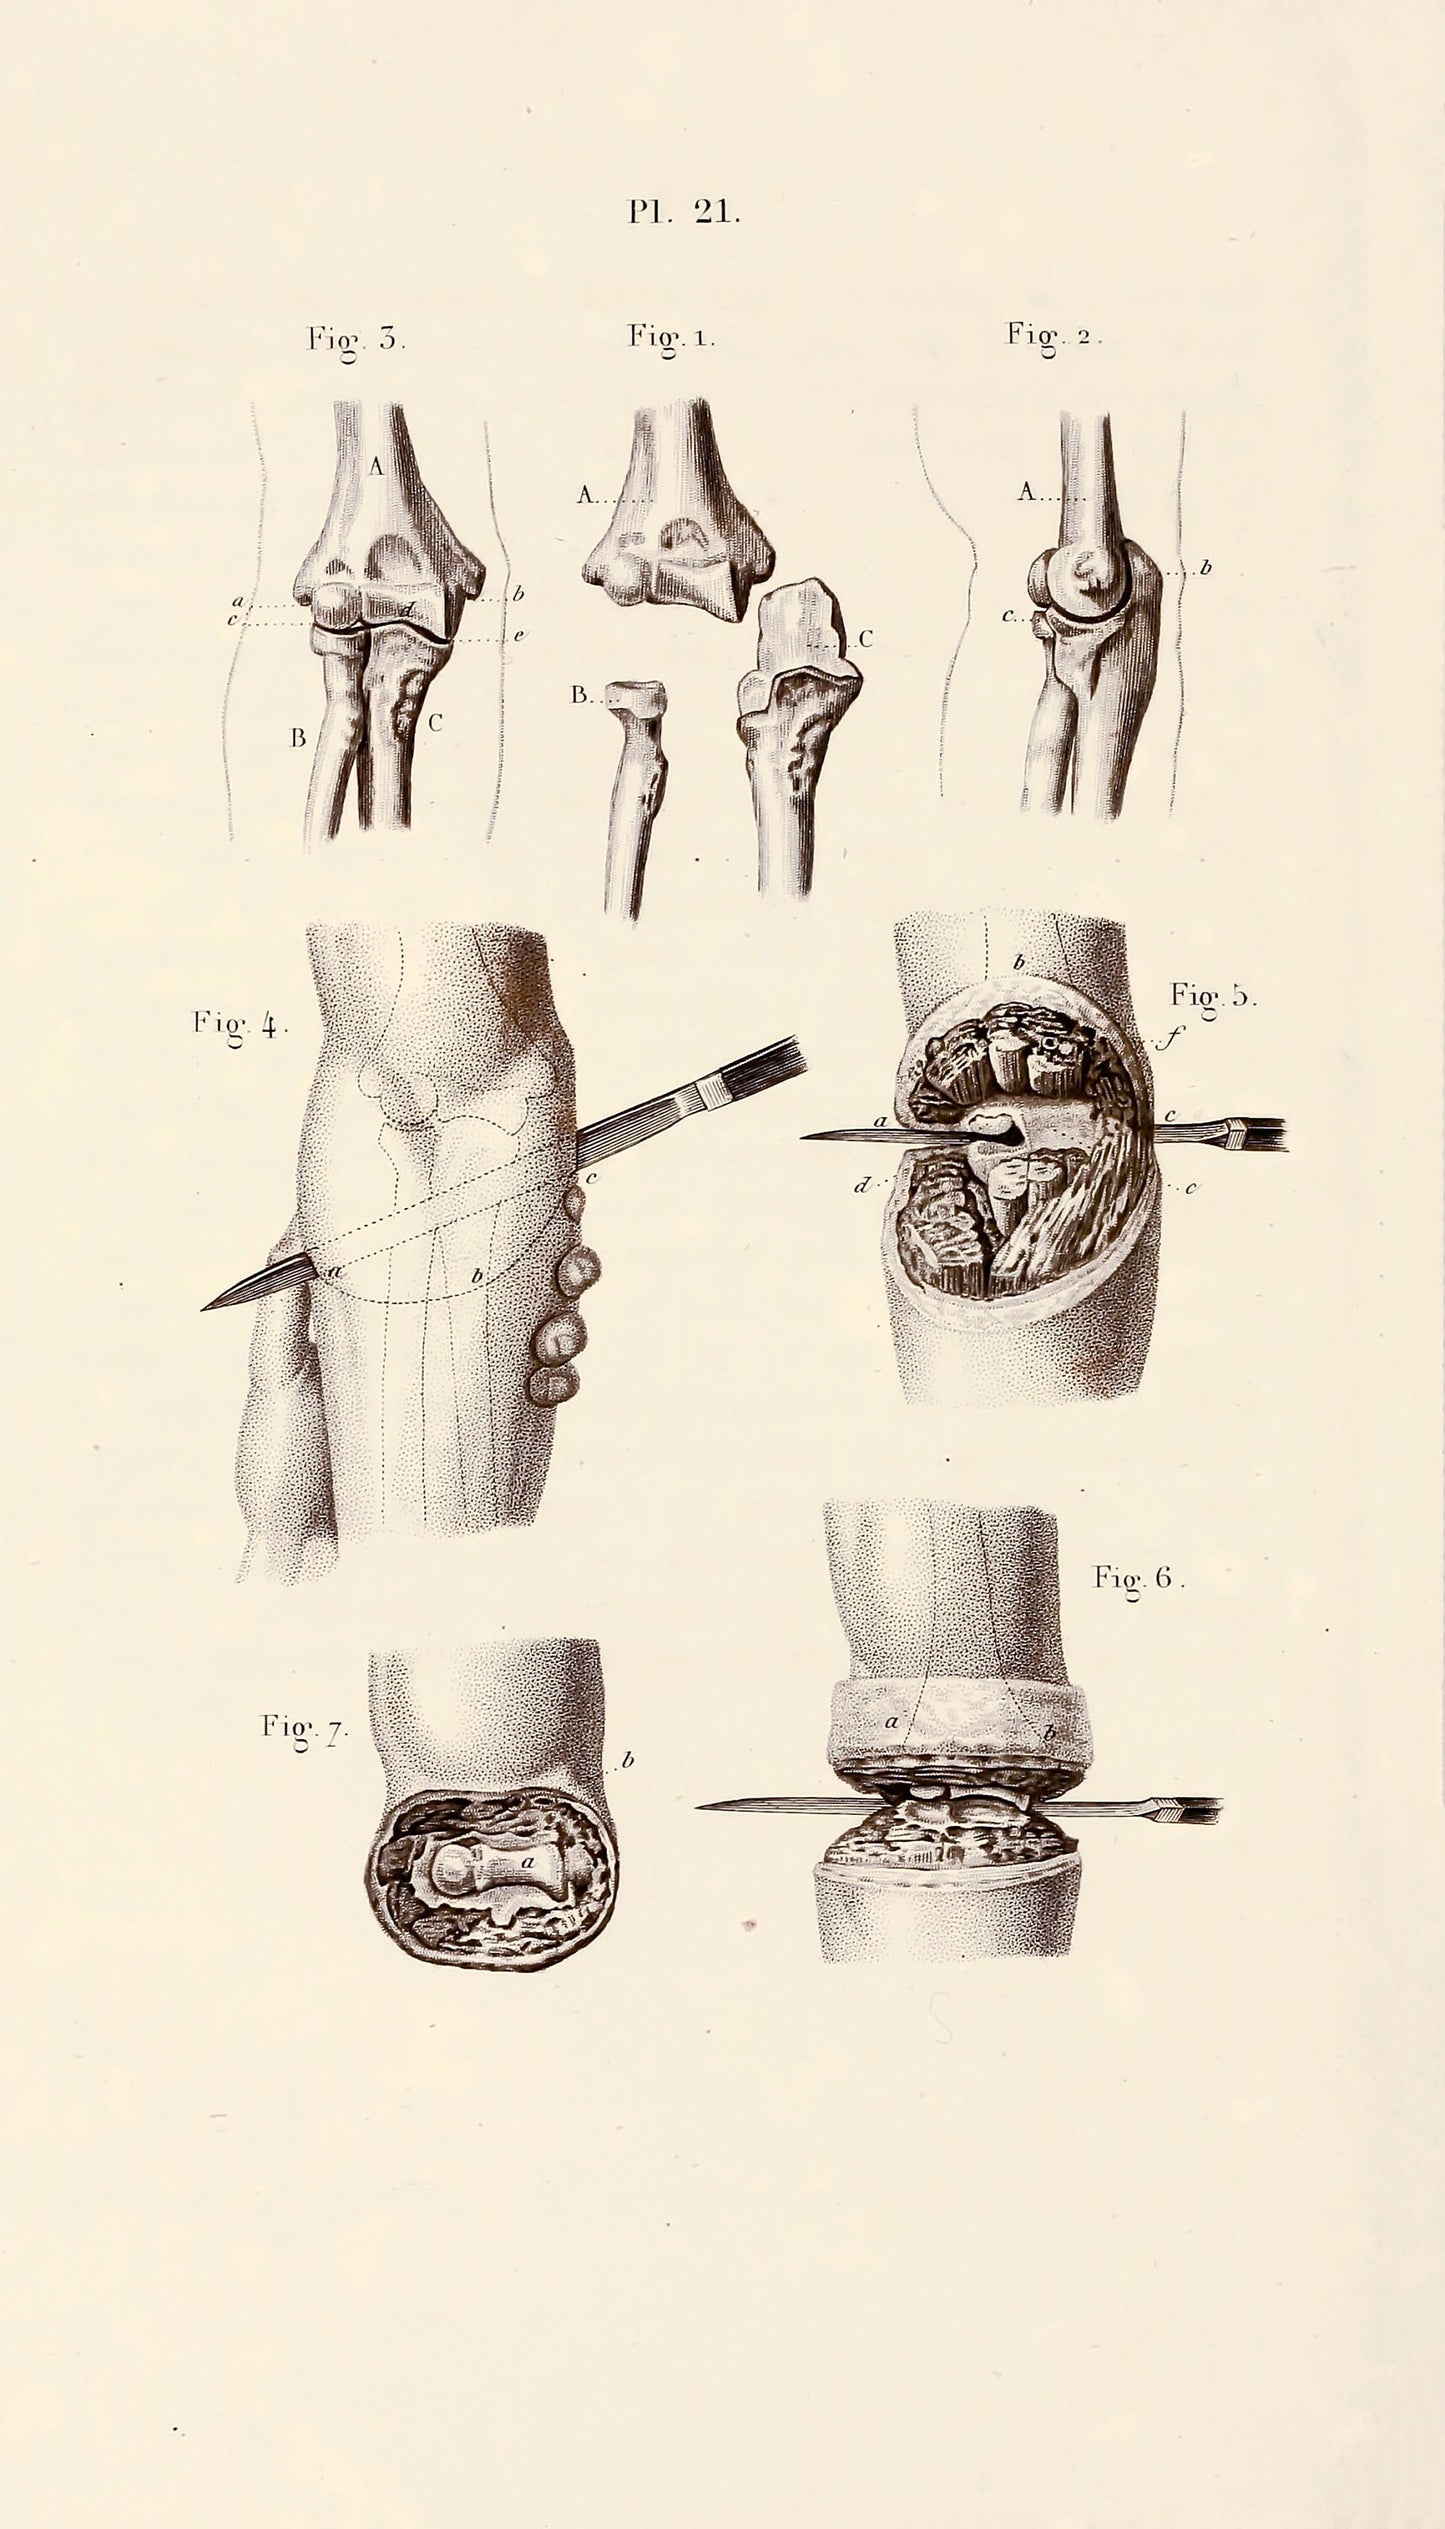 Illustrated Manual of Operative Surgery and Surgical Anatomy Set 1 [55 Images]